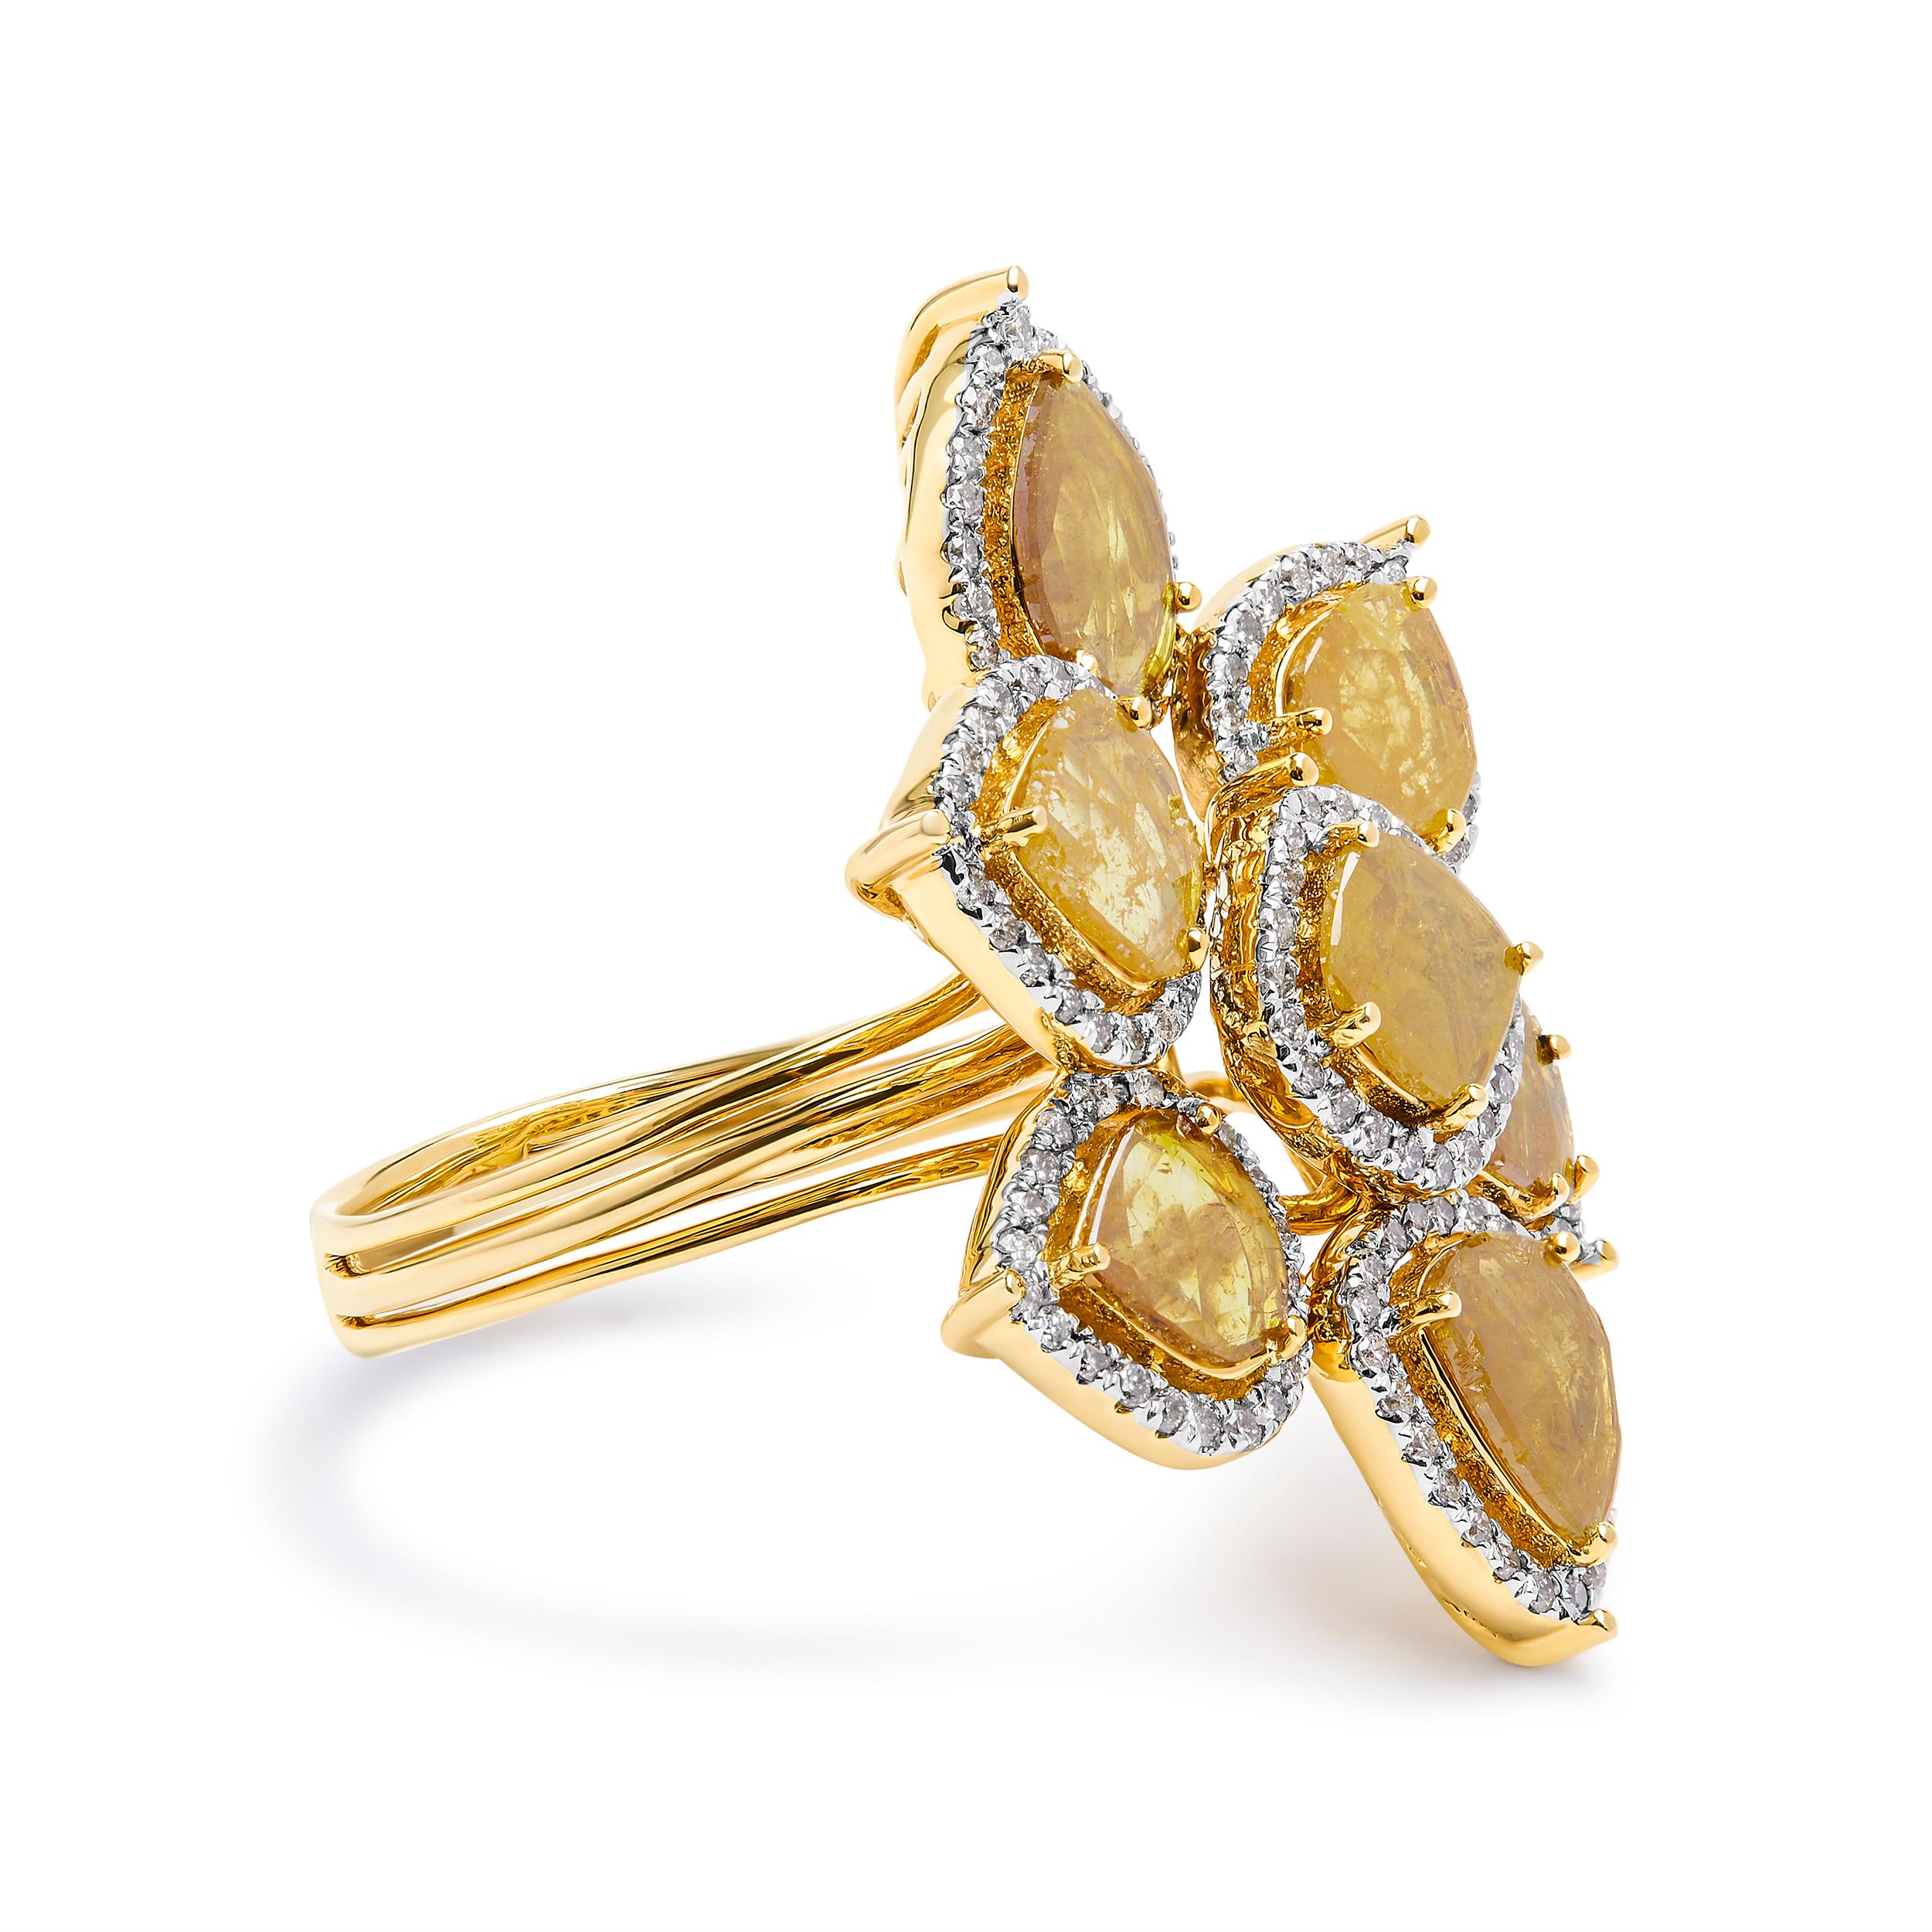 Introducing a mesmerizing masterpiece that will leave you breathless - a 14K Yellow Gold Floral Petal Cocktail Ring. Crafted with love and adorned with 207 exquisite diamonds, this ring is a true symbol of elegance and grace. The captivating design,